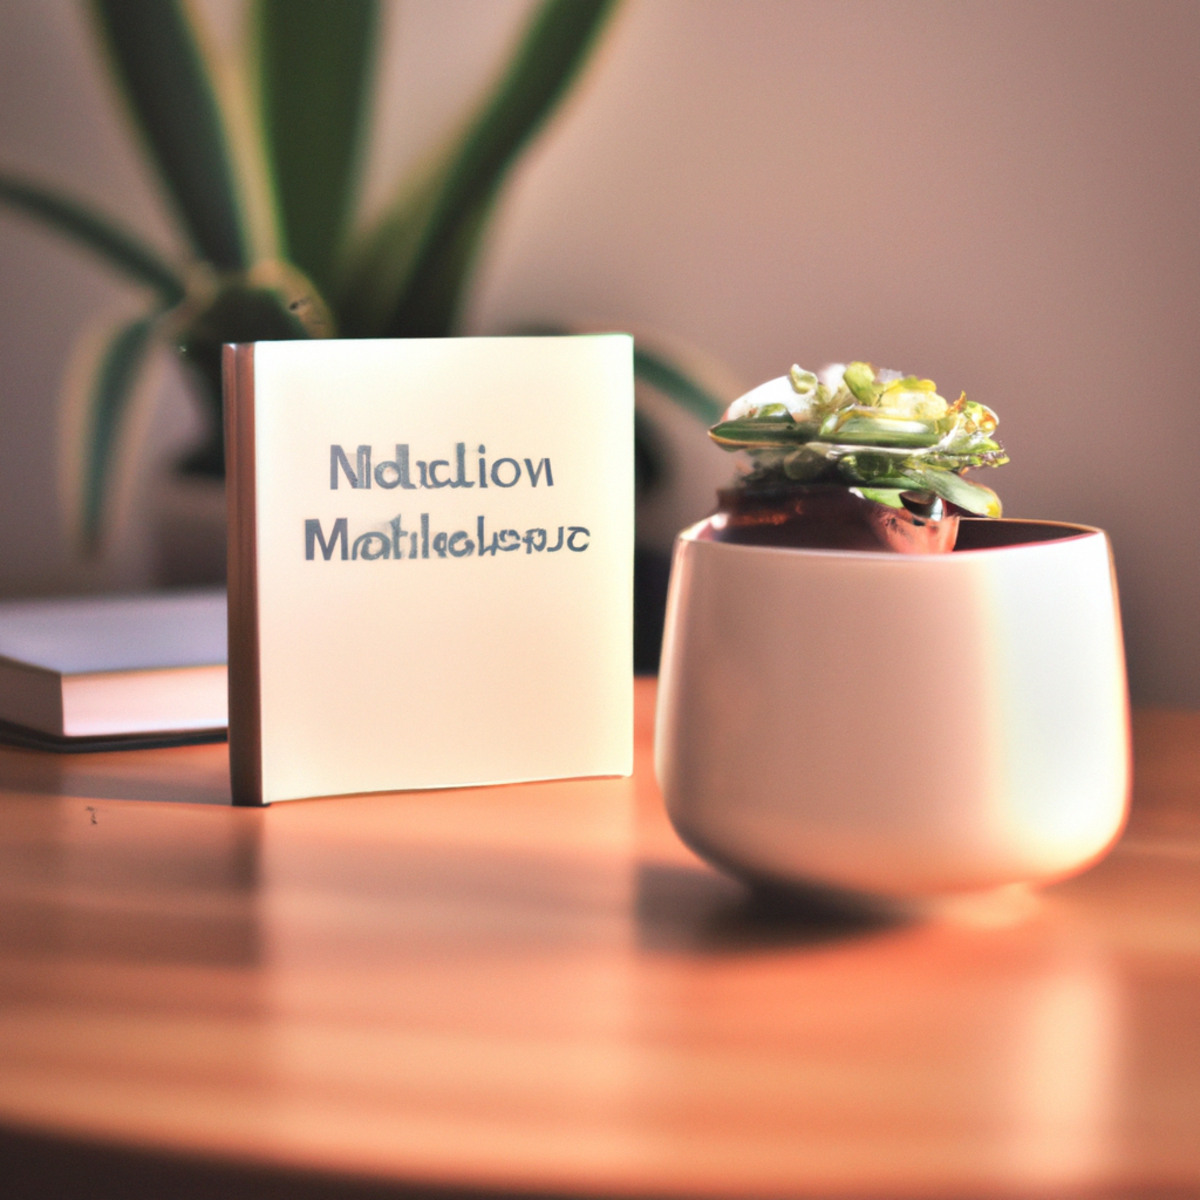 Stress management techniques - Mindfulness essentials on a wooden table: a white mug, a plant, and a book titled "Mindfulness Meditation".